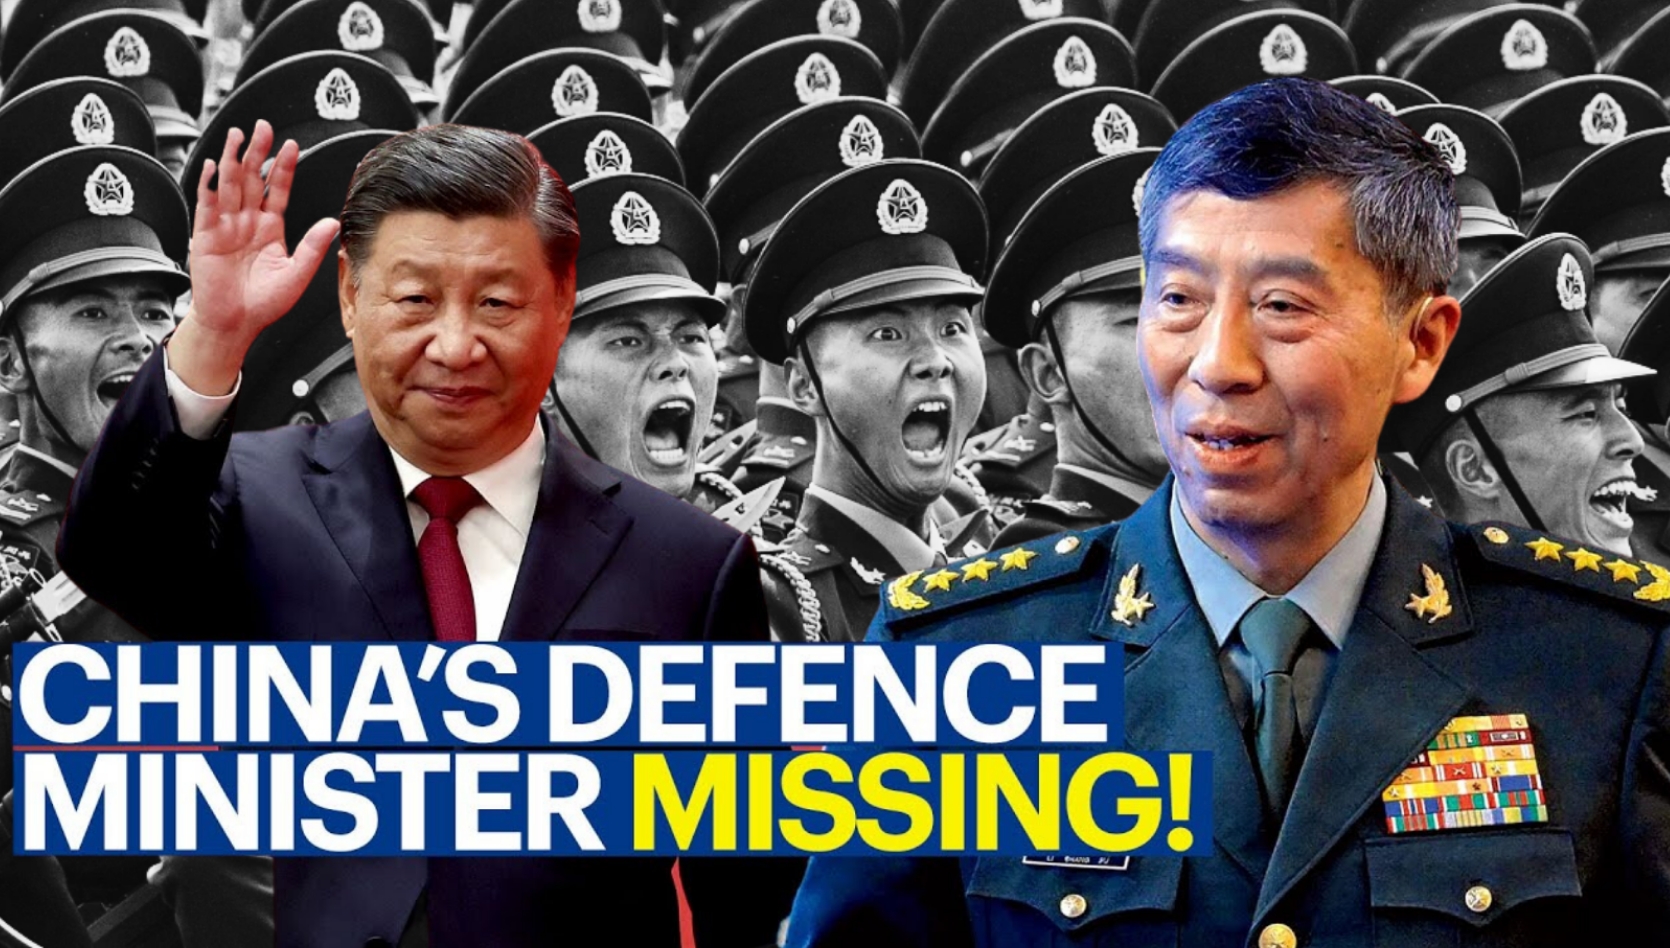 Image about The Uncertain Fate of China’s Defense Minister